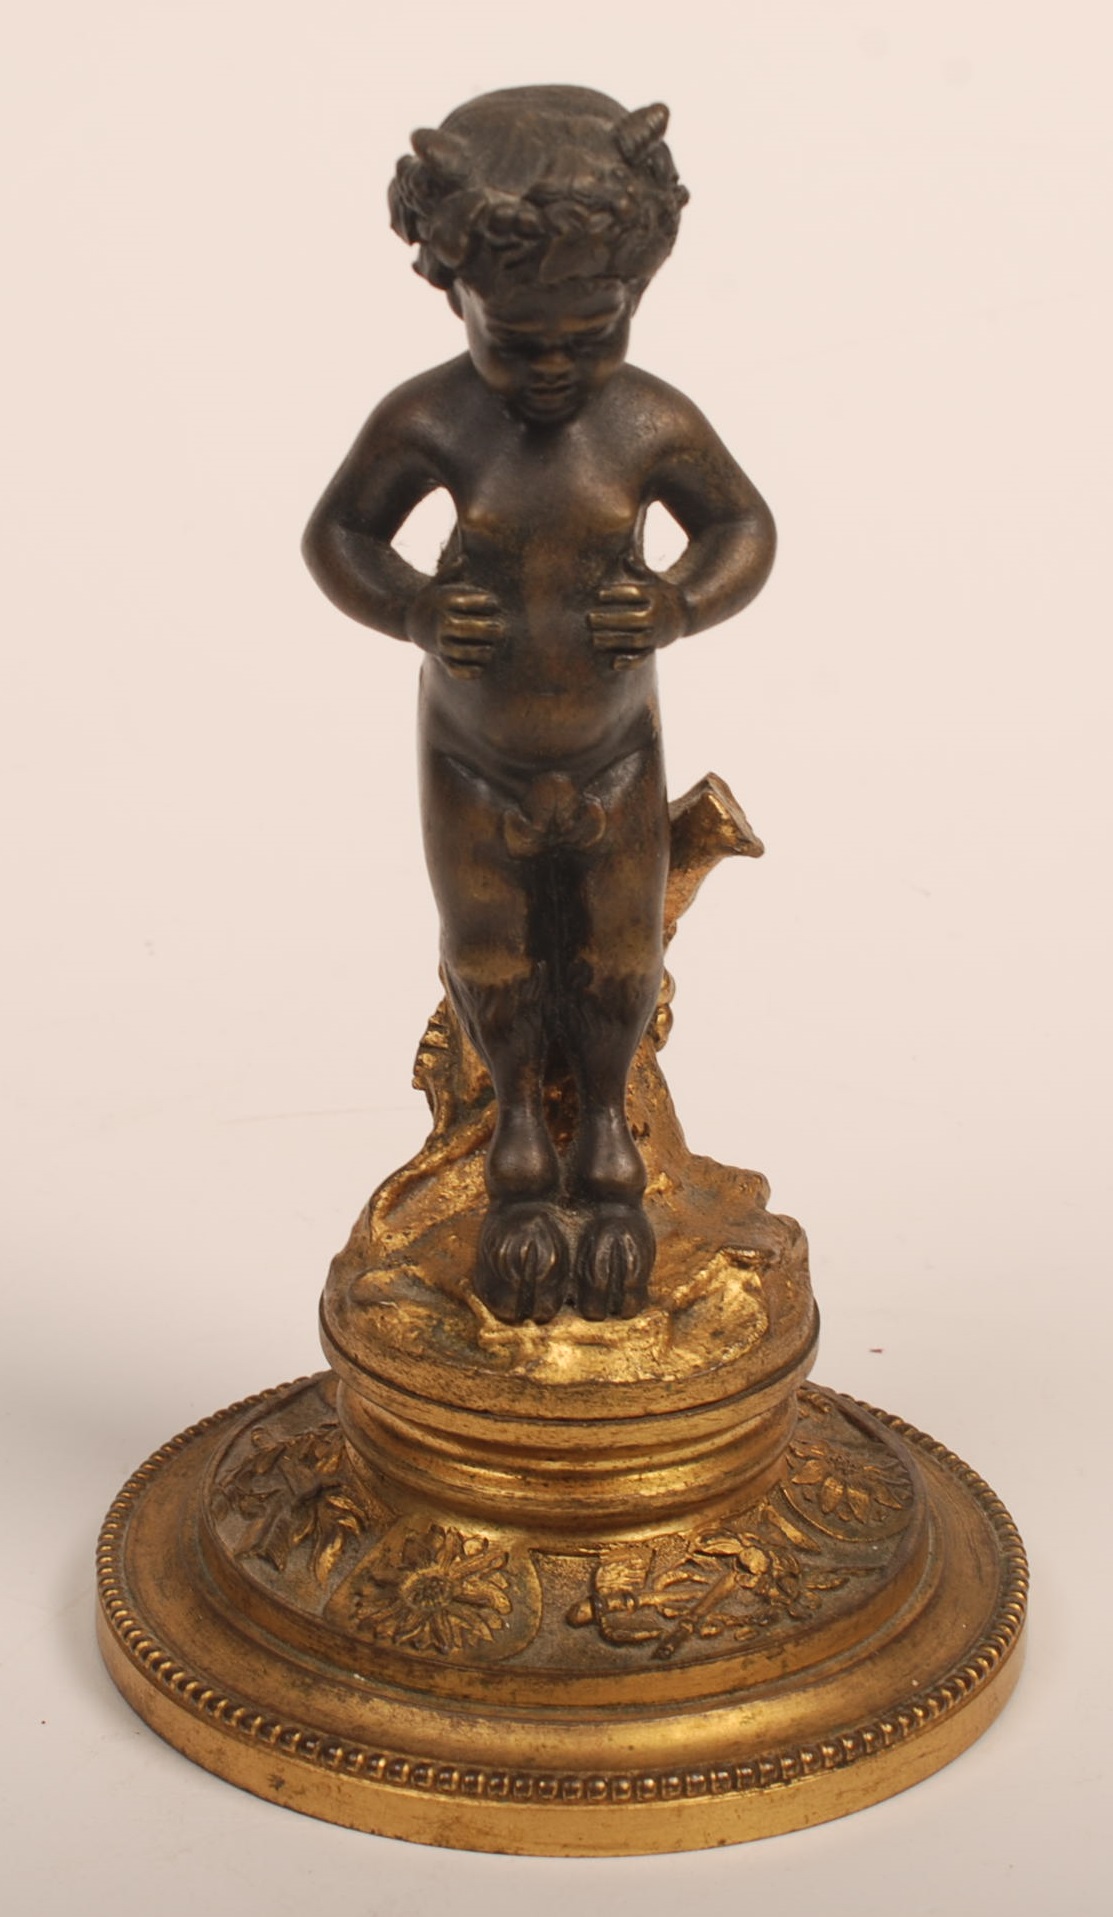 A 19th century bronze and gilt bronze figure of a young satyr. Height 17cm.